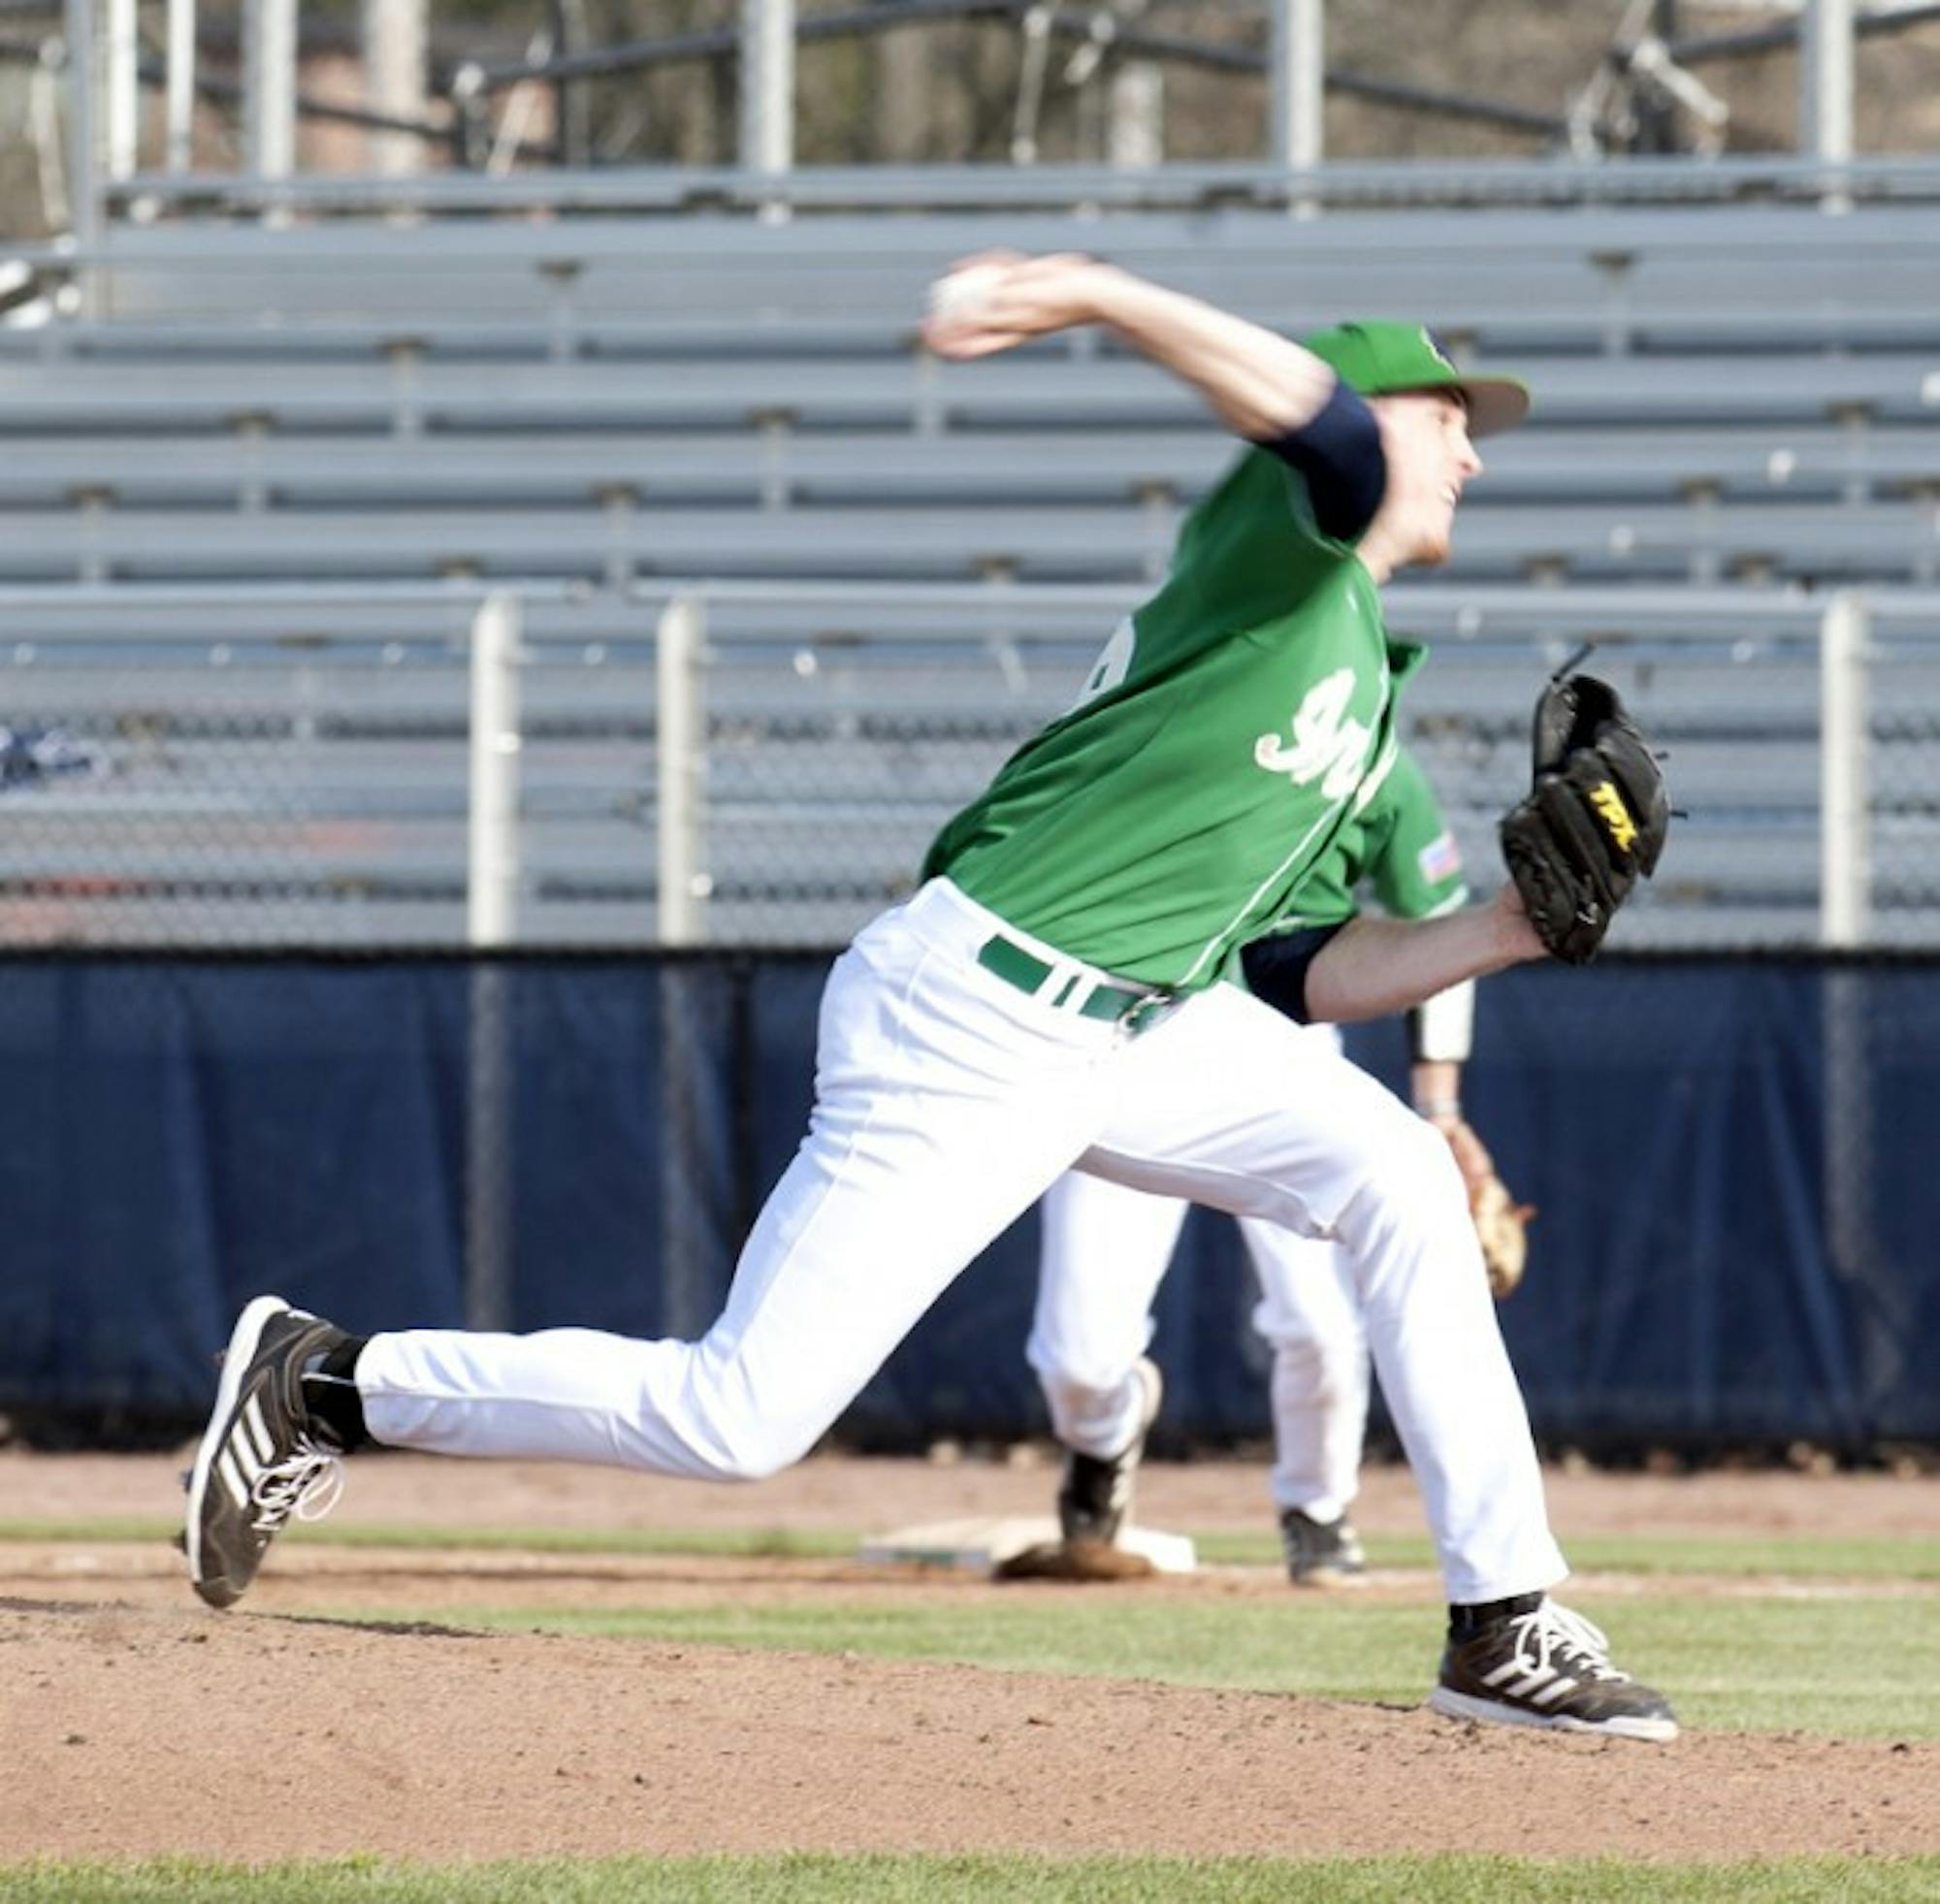 Irish senior pitcher Pat Connaughton releases a pitch during Notre Dame's 12-2 win over Connecticut on April 26, 2013.